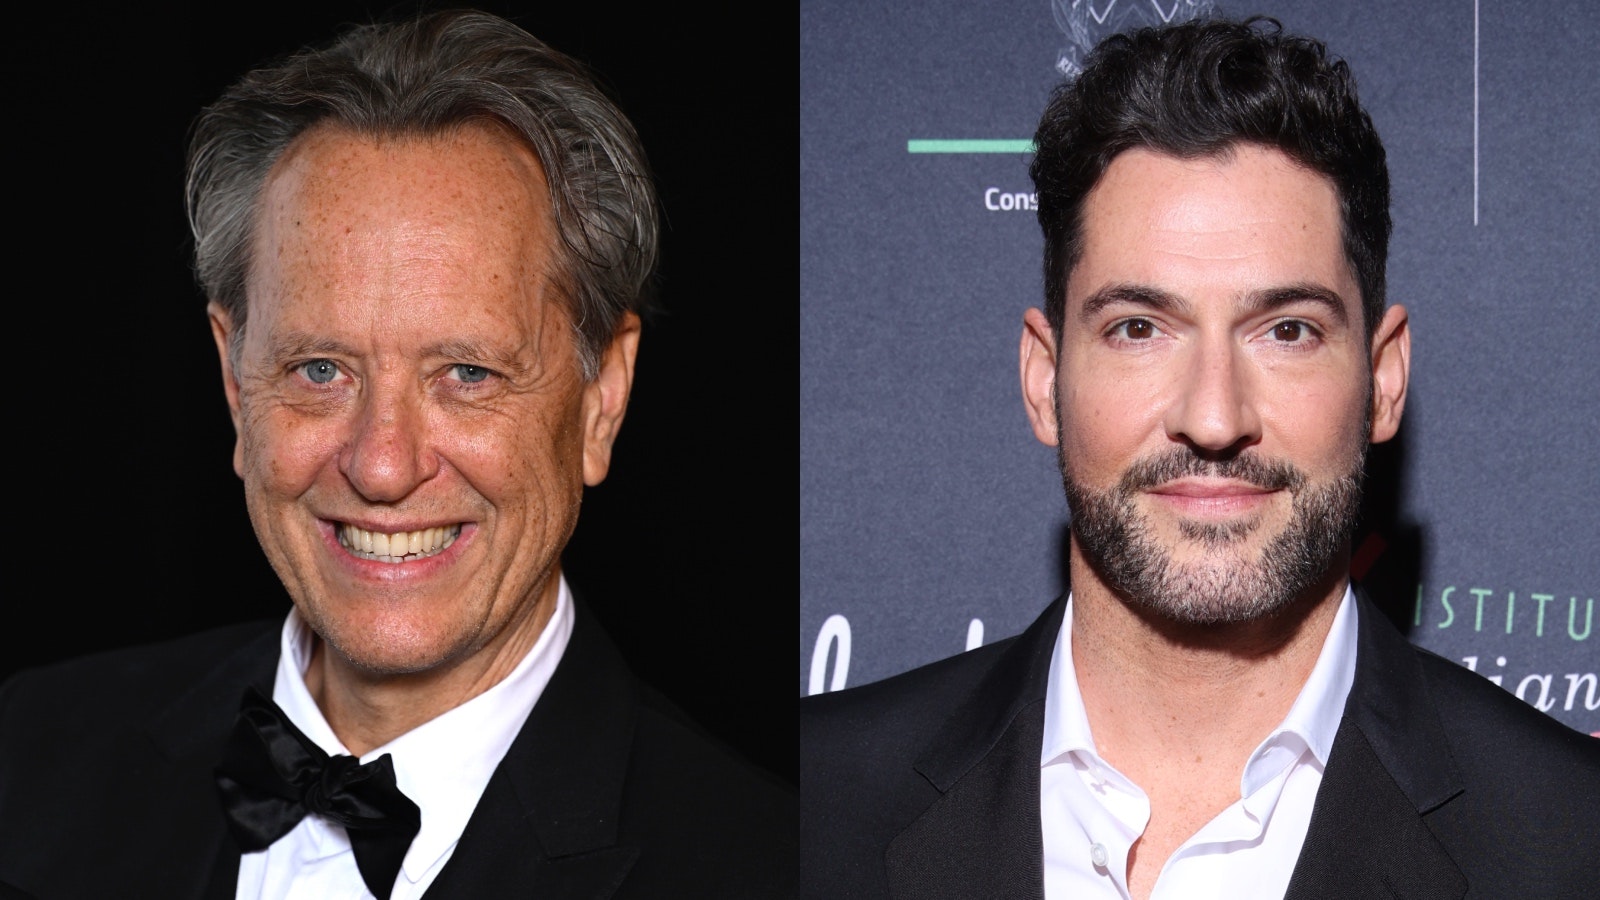 The cast of “The Thursday Murder Club” expands to include Richard E. Grant, Tom Ellis and more